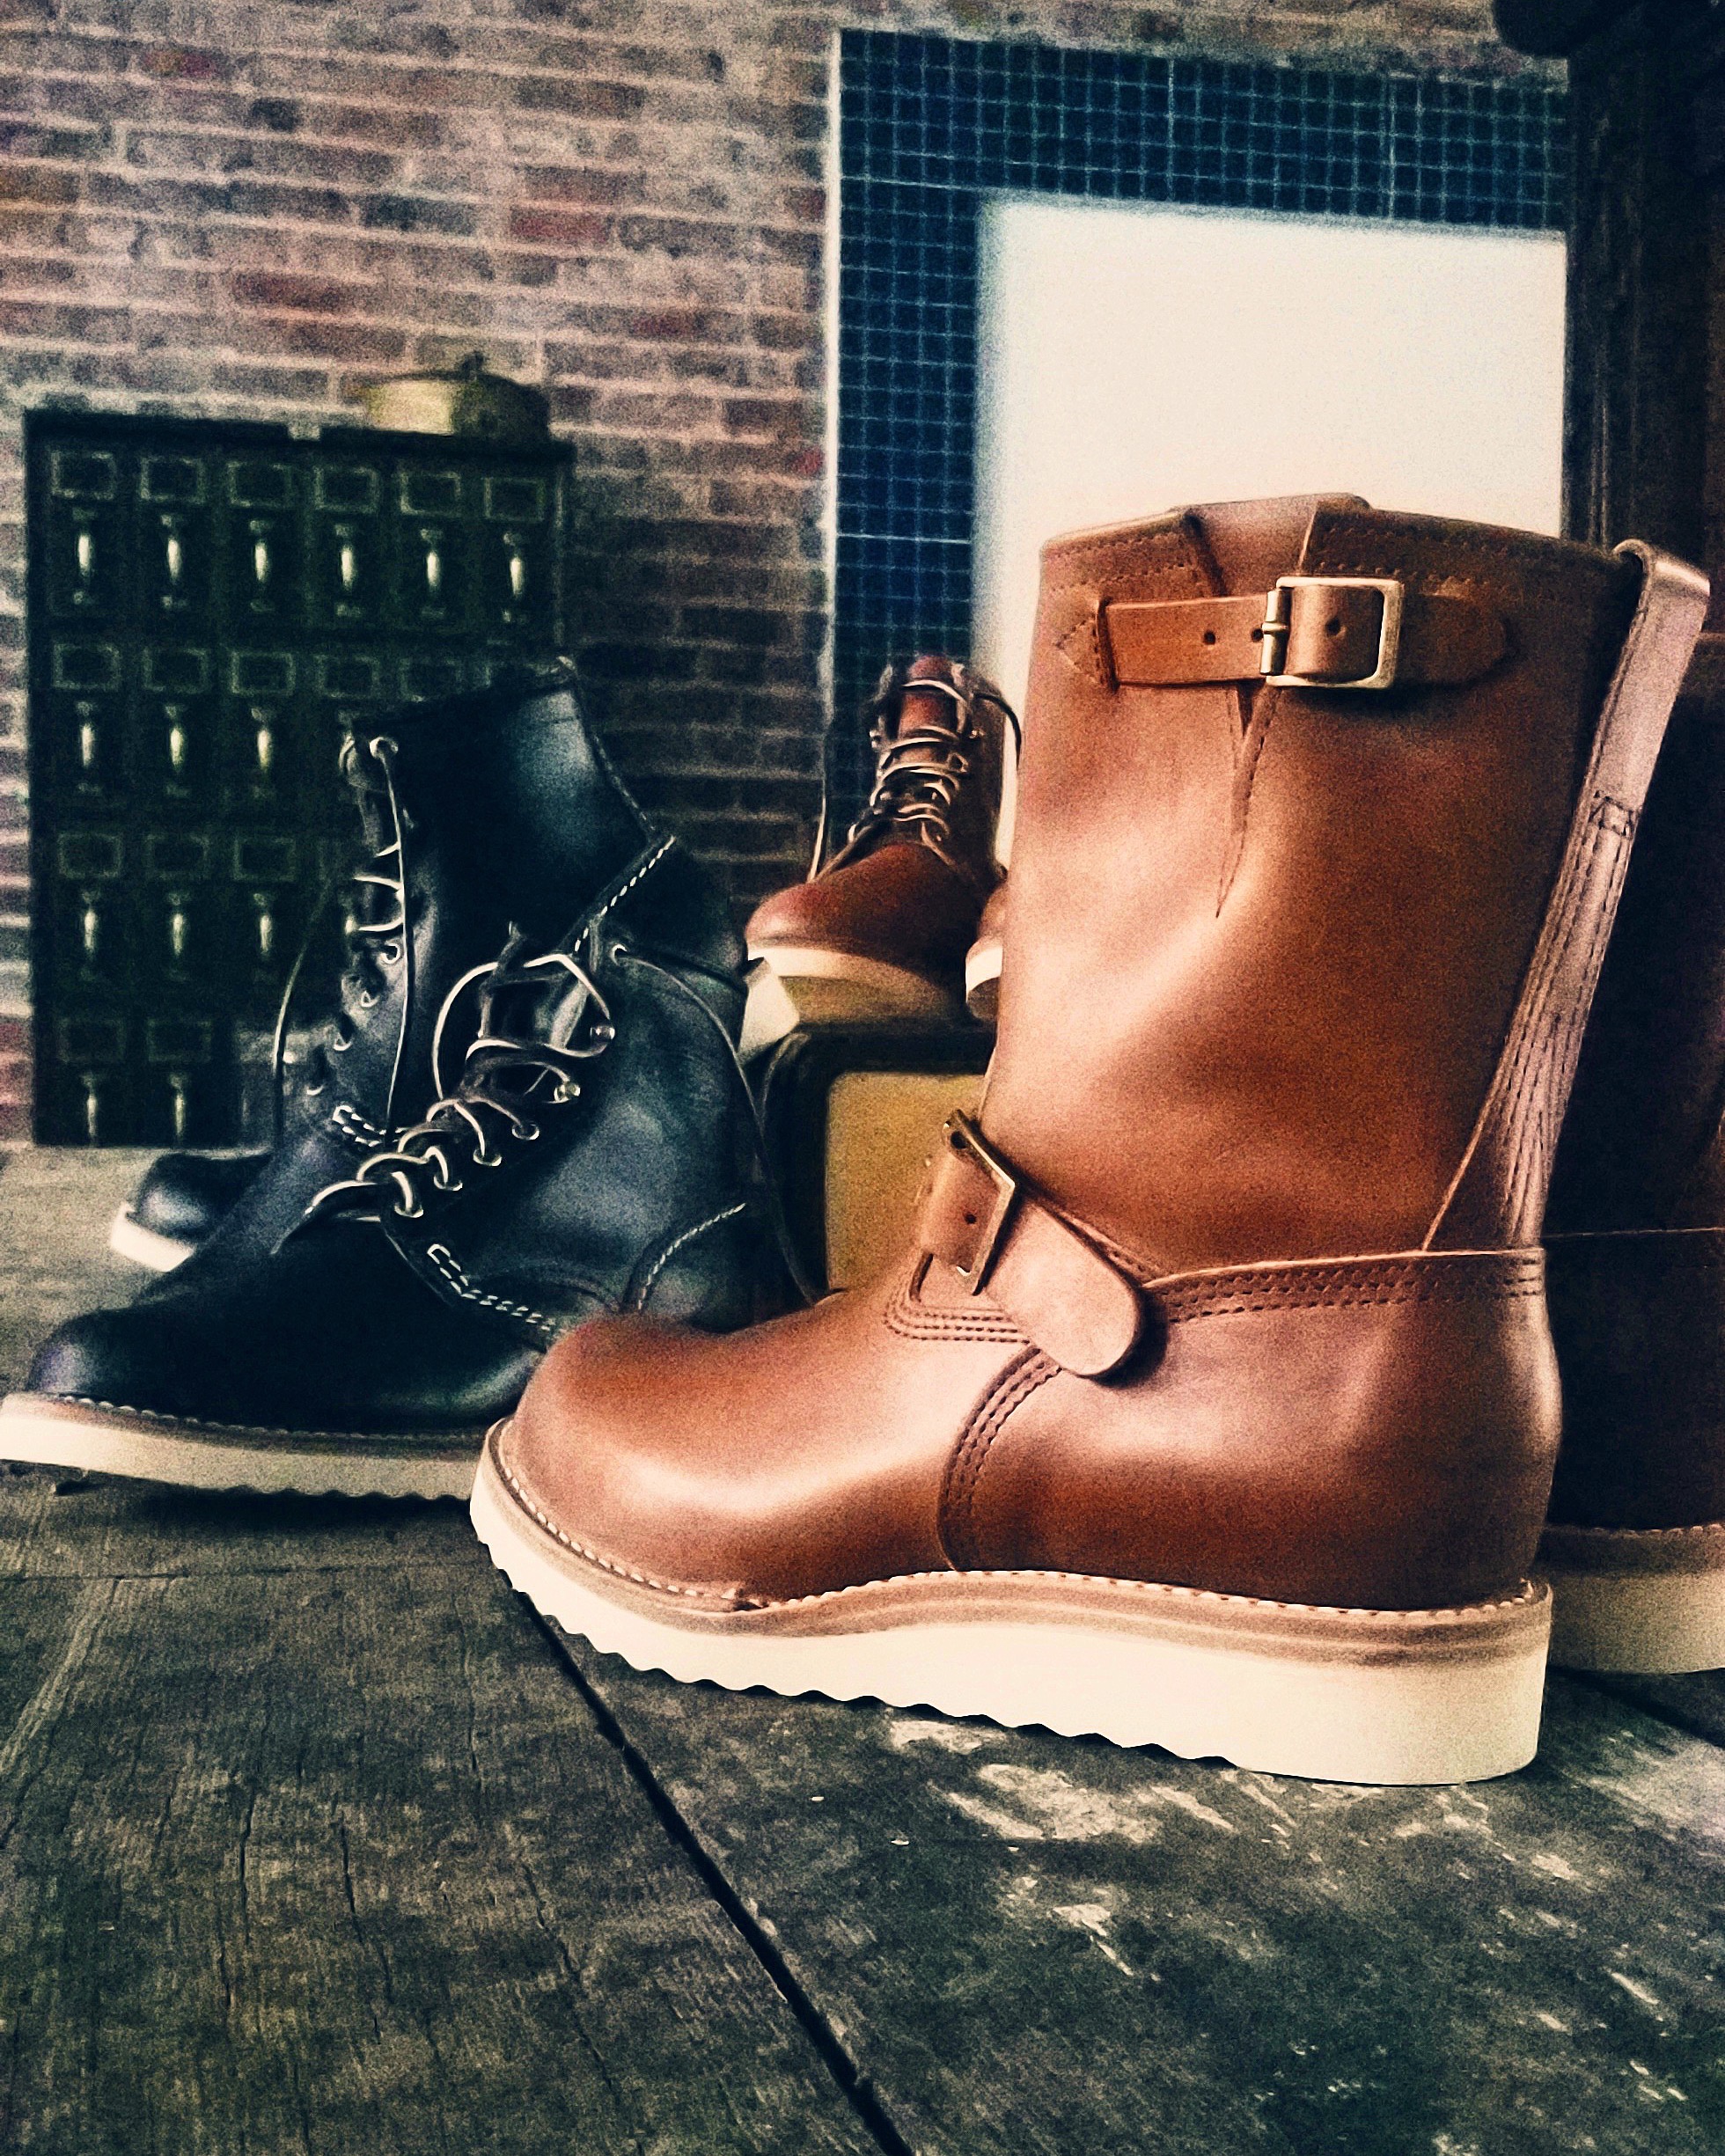 Black Bear Brand x Wesco x Horween boot collection 